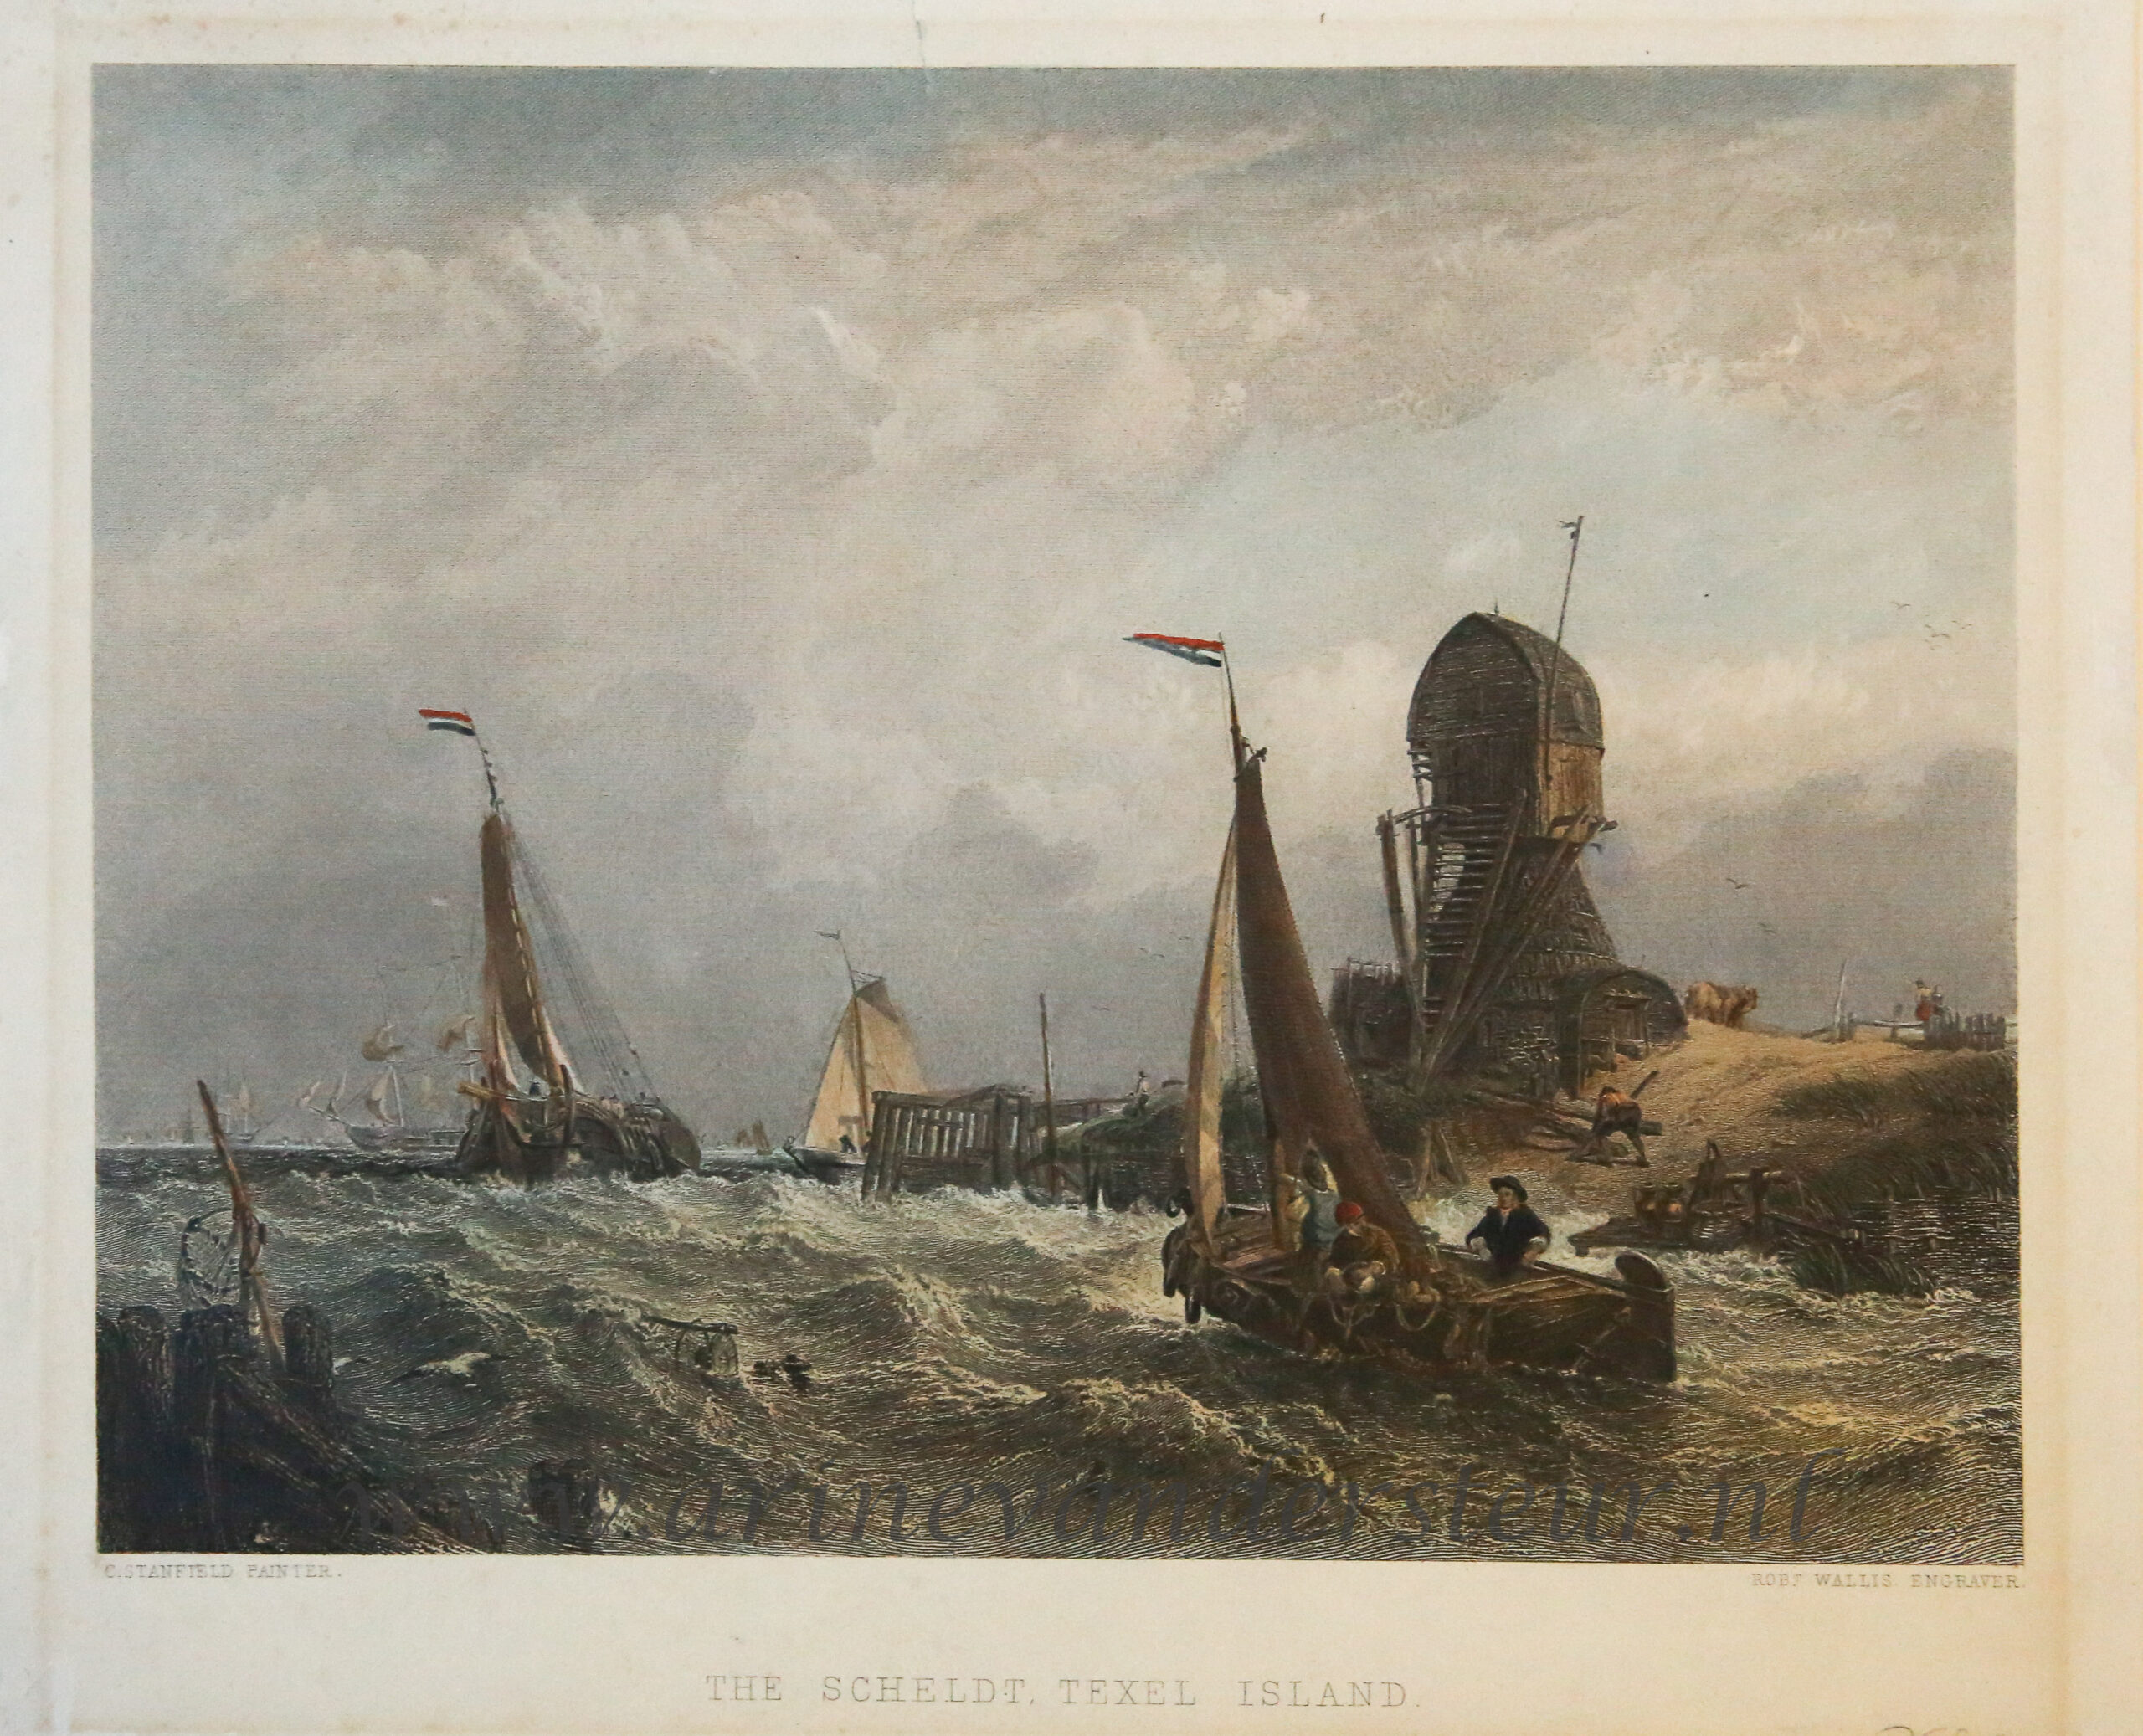 [Antique print, etching and engraving] The Scheldt, Texel Island, published 1849.